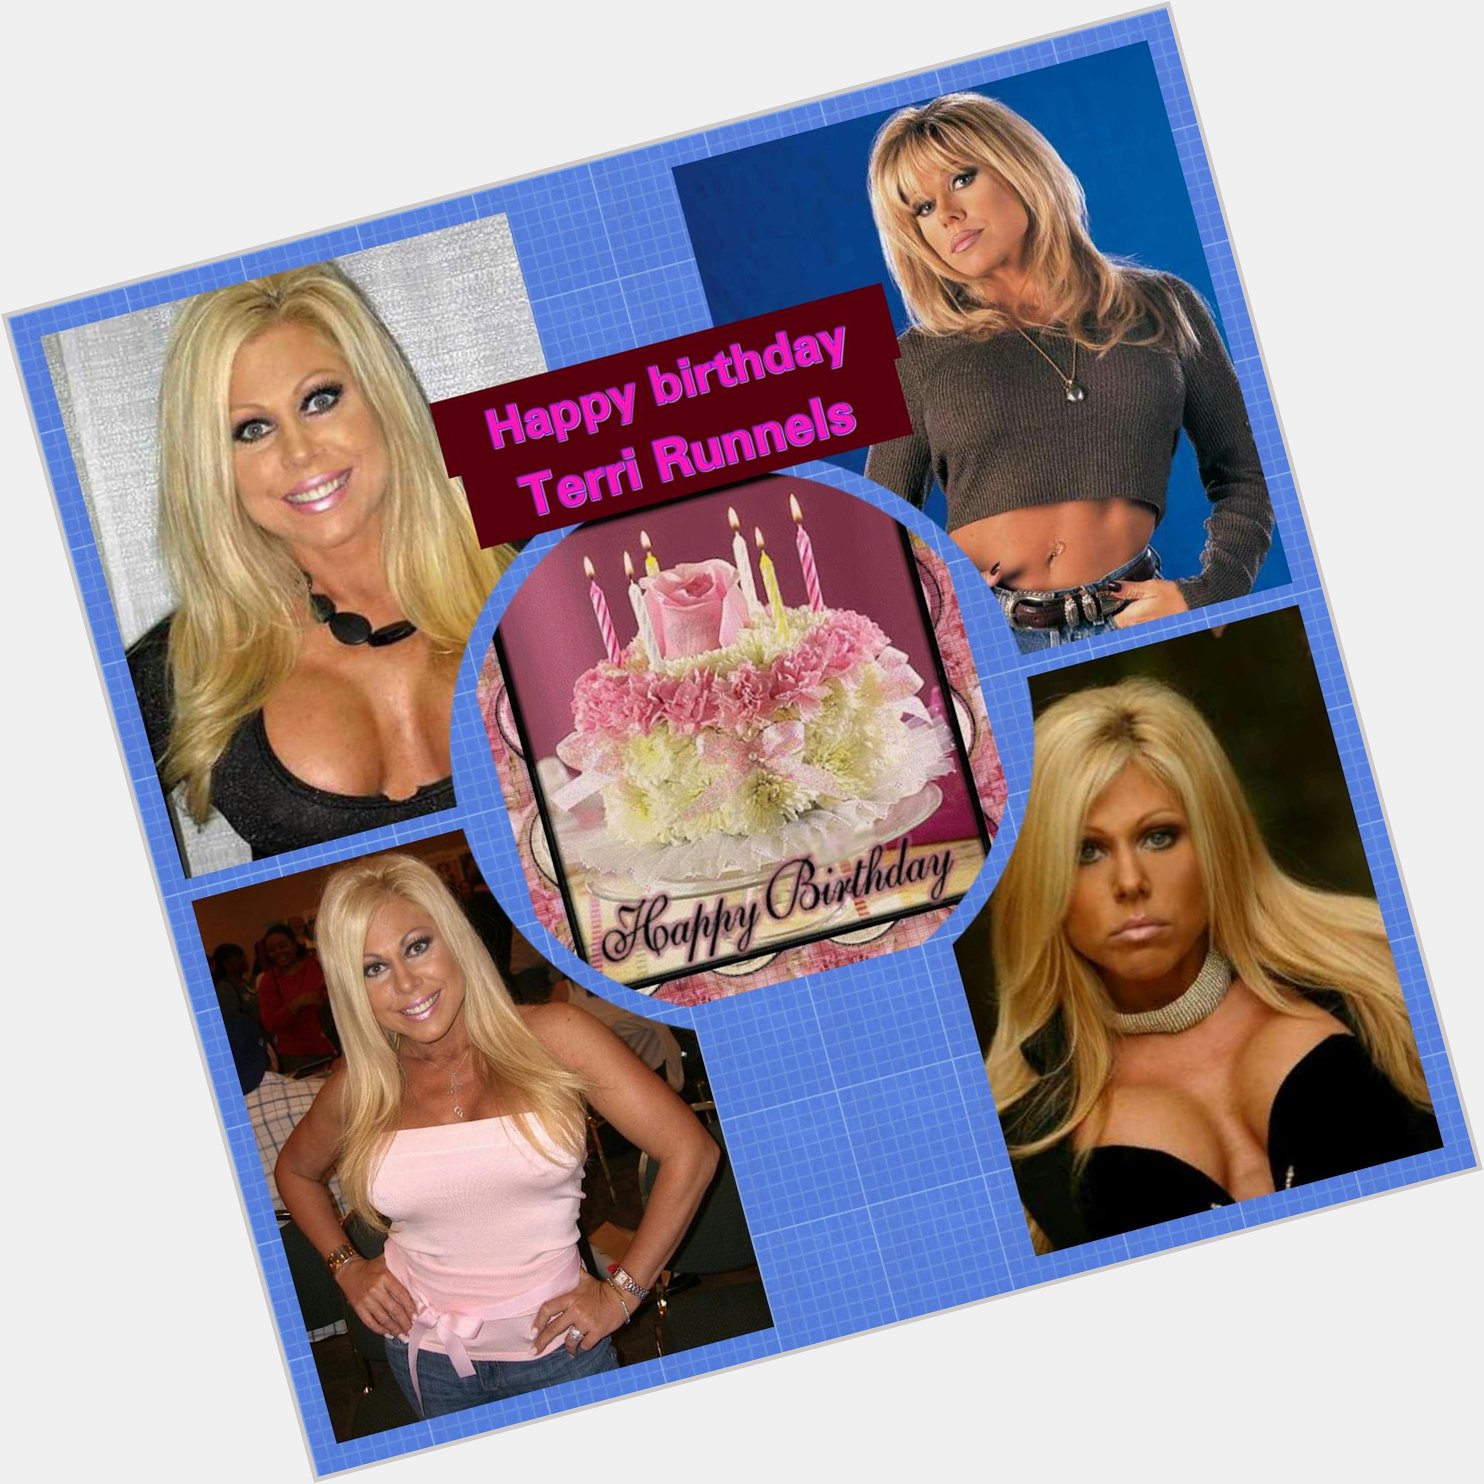  Happy birthday to the most beautiful wrestling diva in the world, Terri Runnels! My favorite too! 